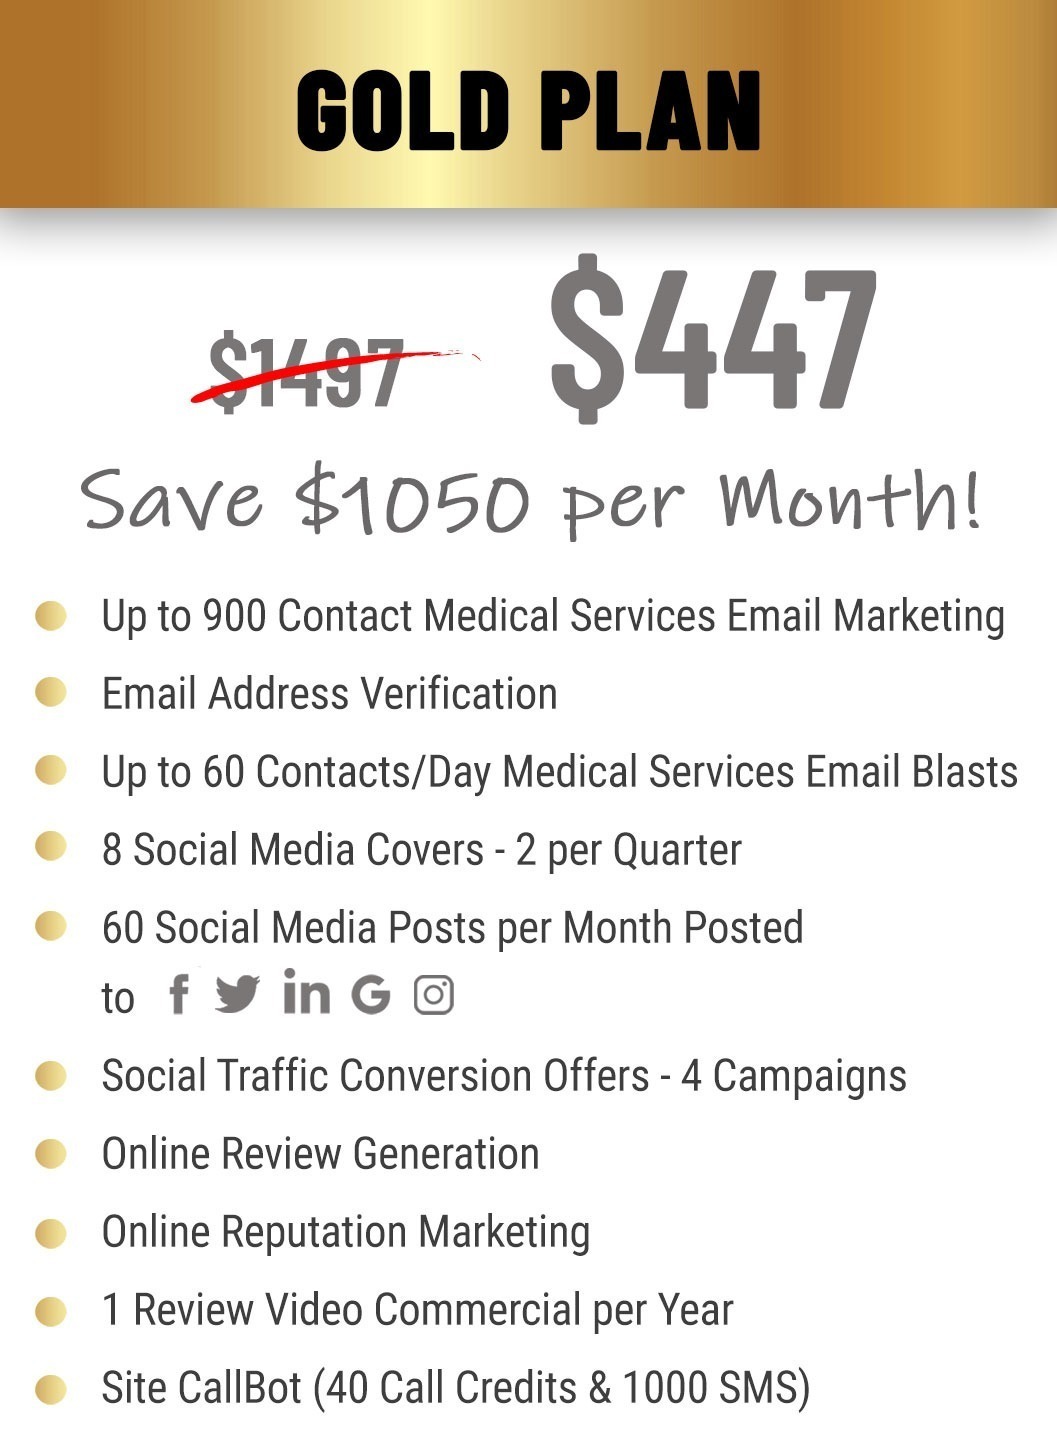 gold plan $447 per month pricing and features for medical services.